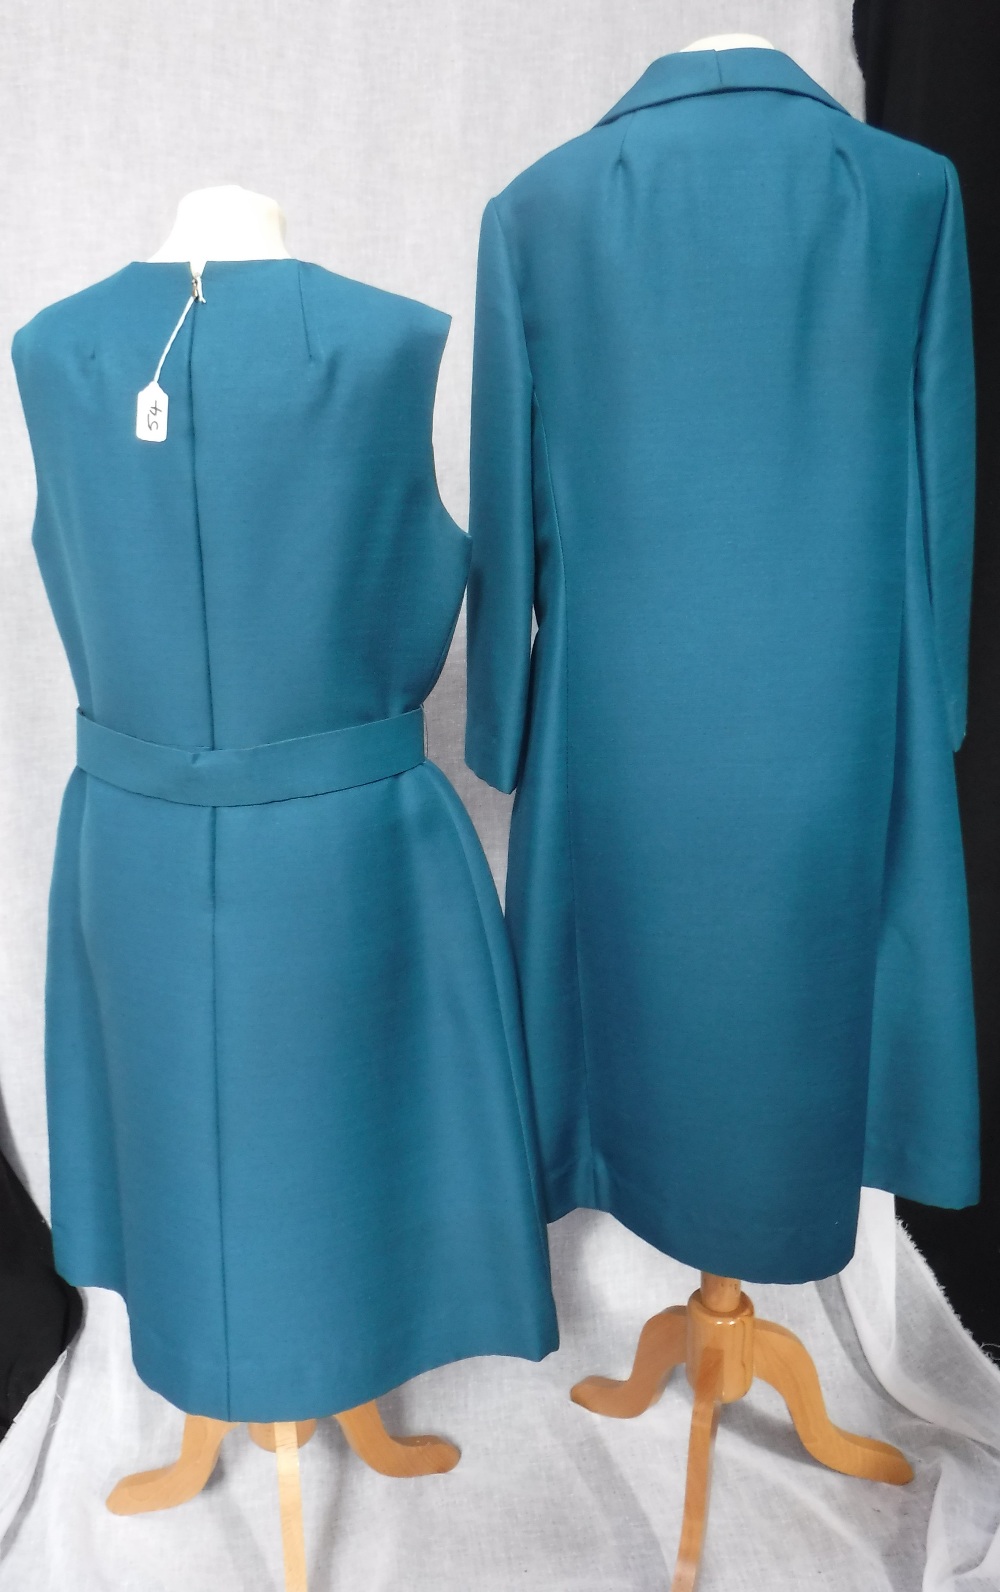 PETIT FRANCAISE; A LADIES VINTAGE 'TEAL' COLOURED DRESS: with matching 3/4 sleeved coat, circa - Image 2 of 4